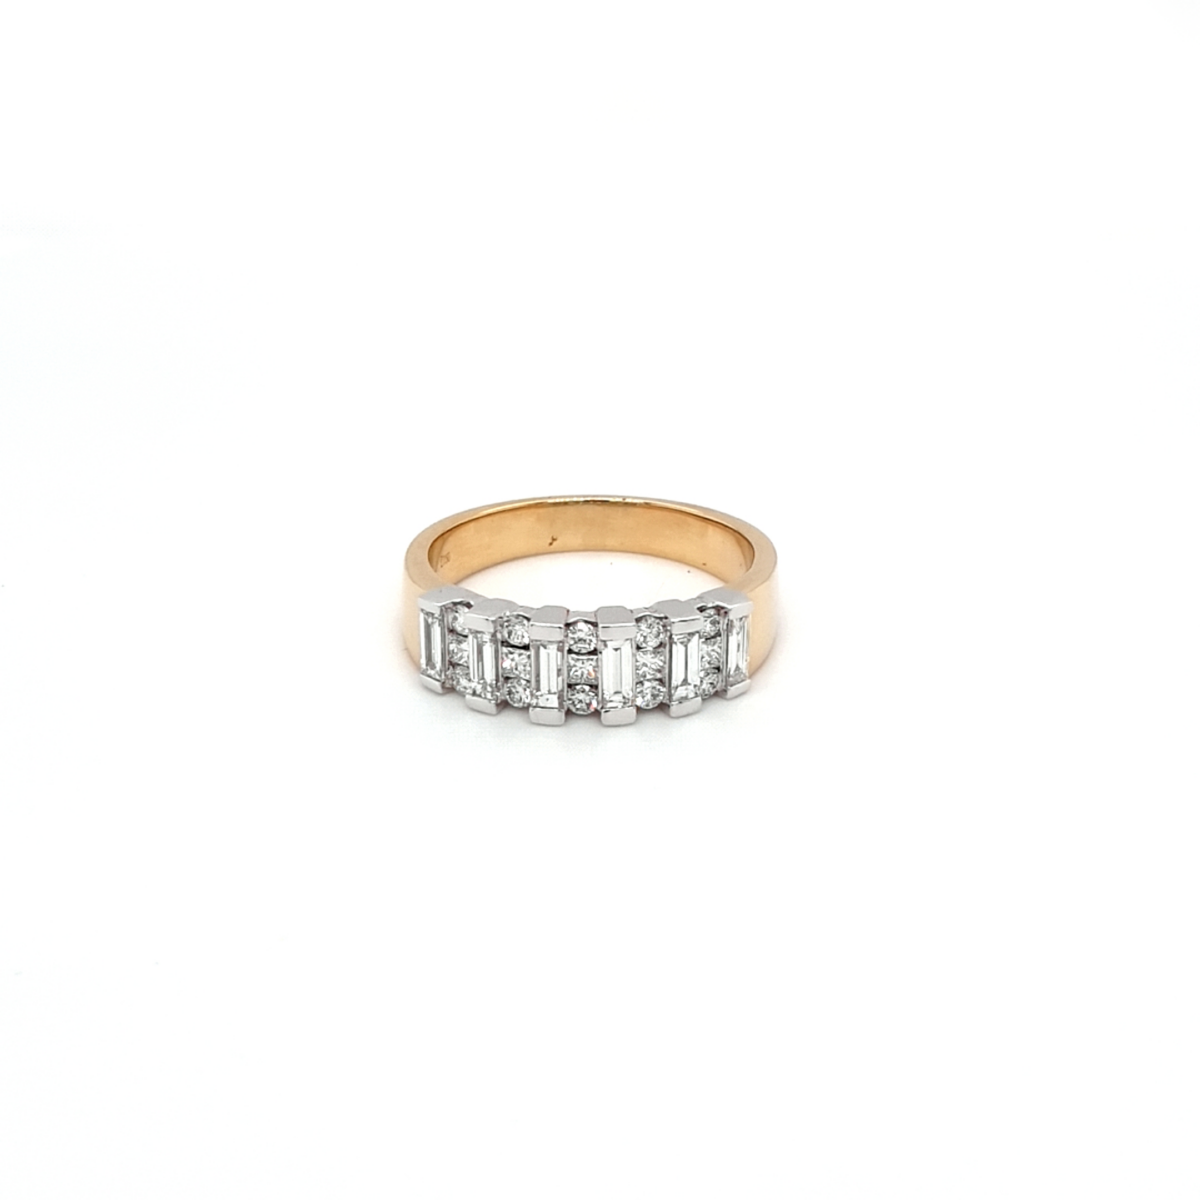 Leon Bakers 18K Yellow and White Gold Diamond Ring_0